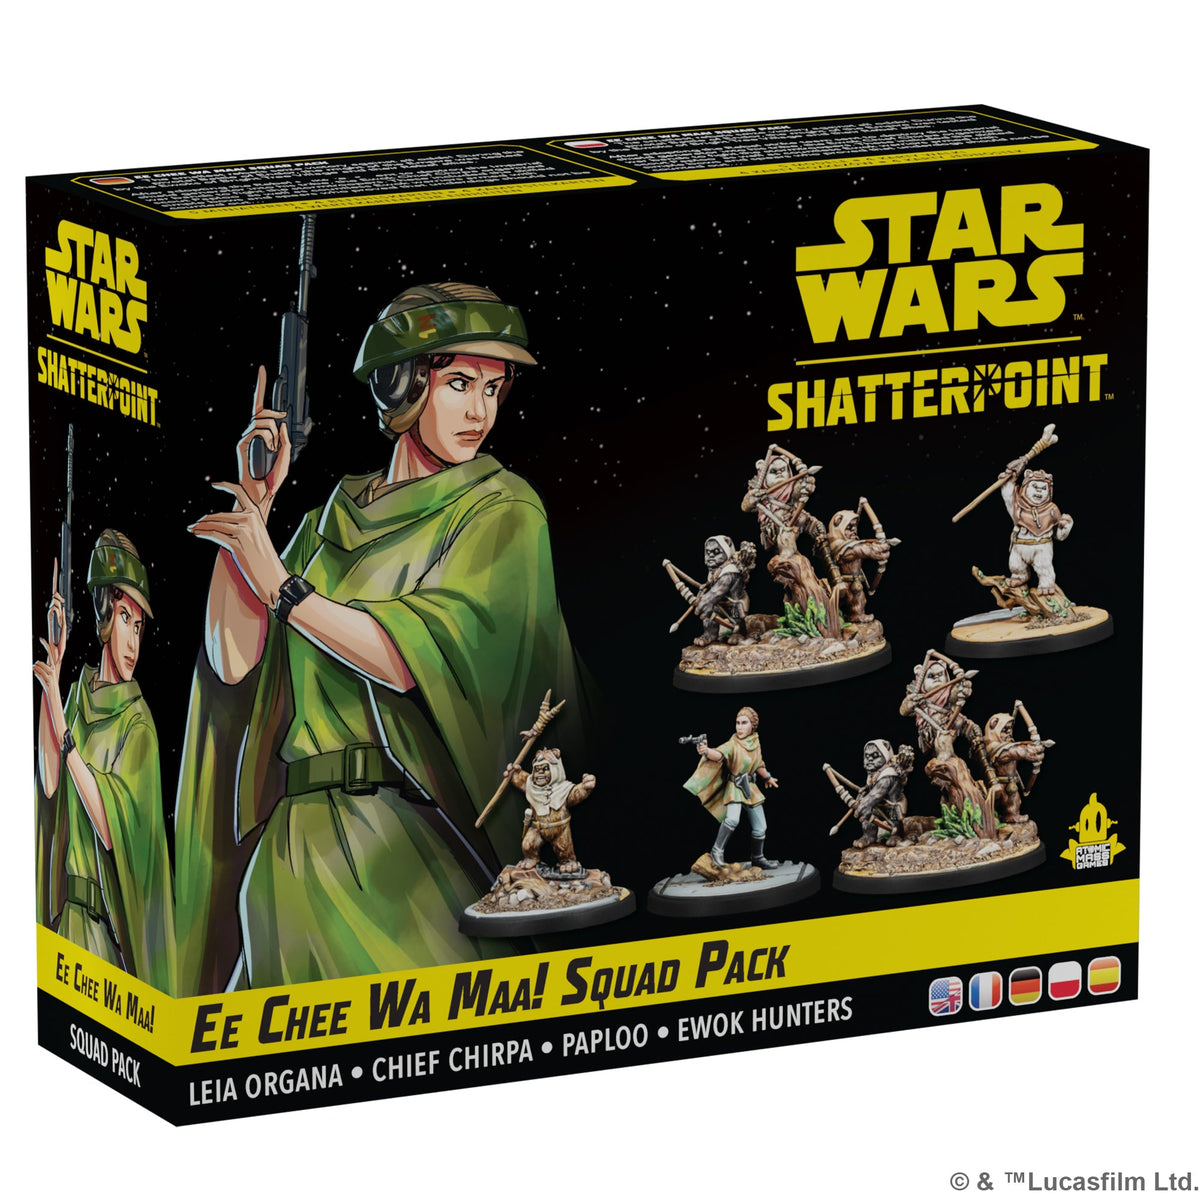 Ee Chee Wa Maa! Squad Pack (Star Wars: Shatterpoint)